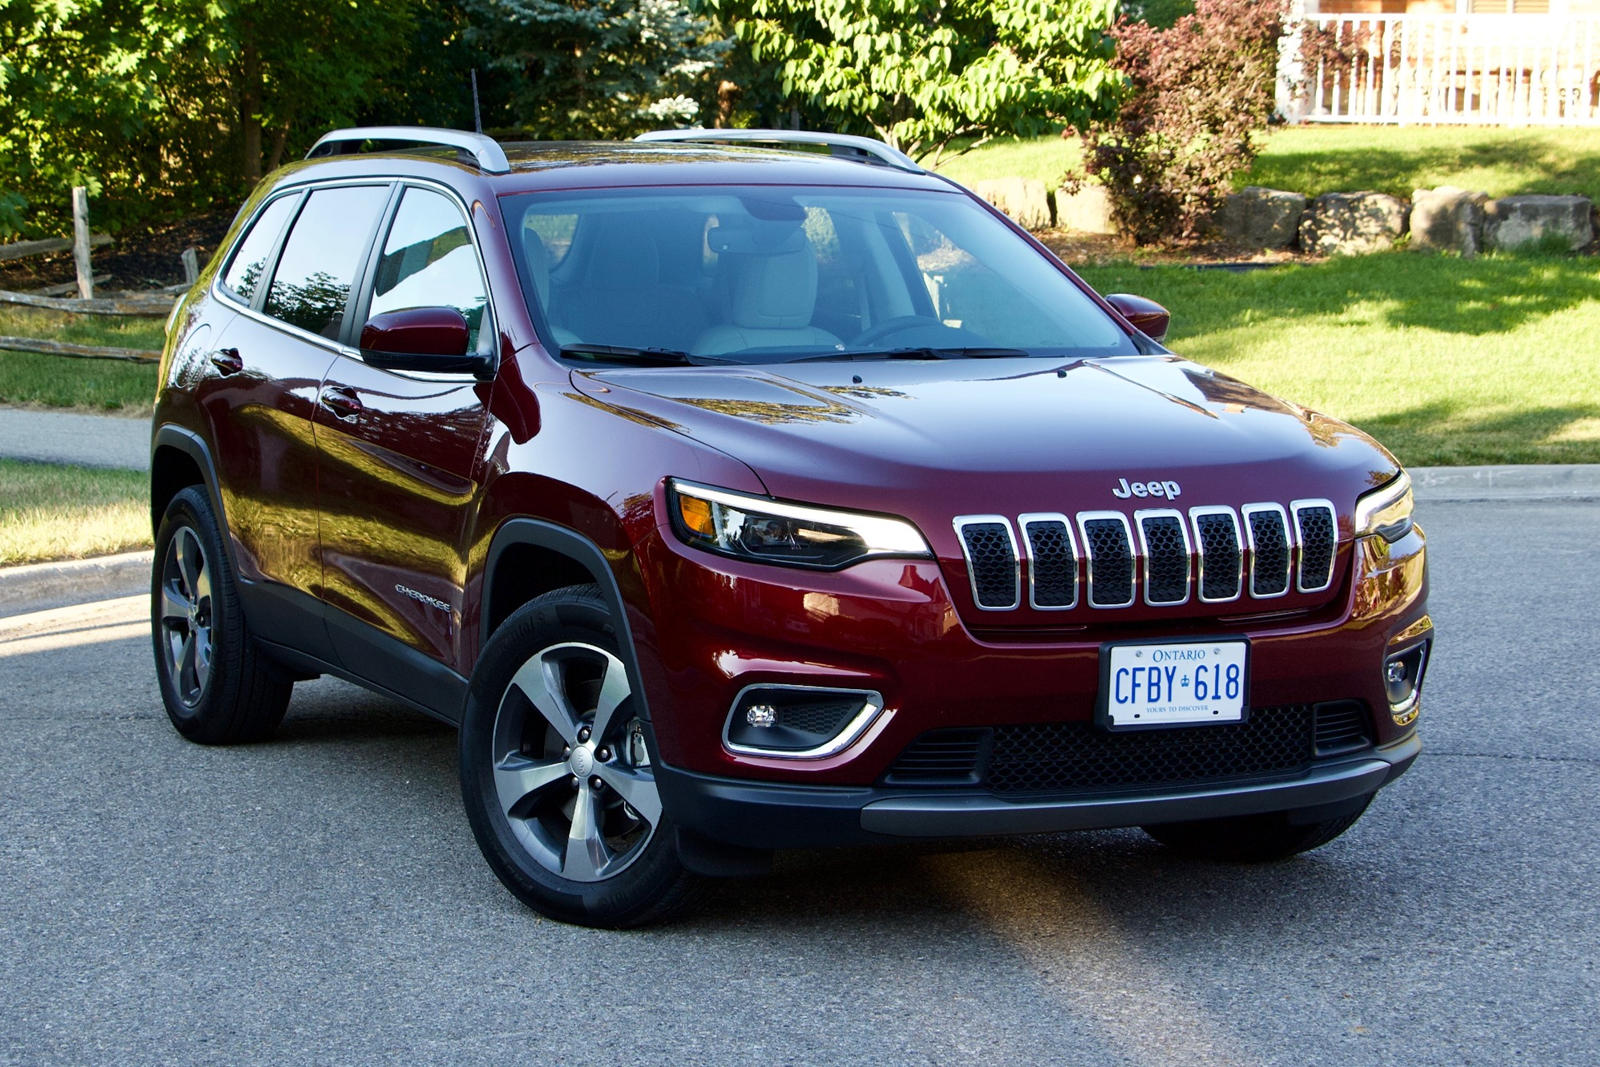 2019 Jeep Cherokee Test Drive Review: In Too Deep.